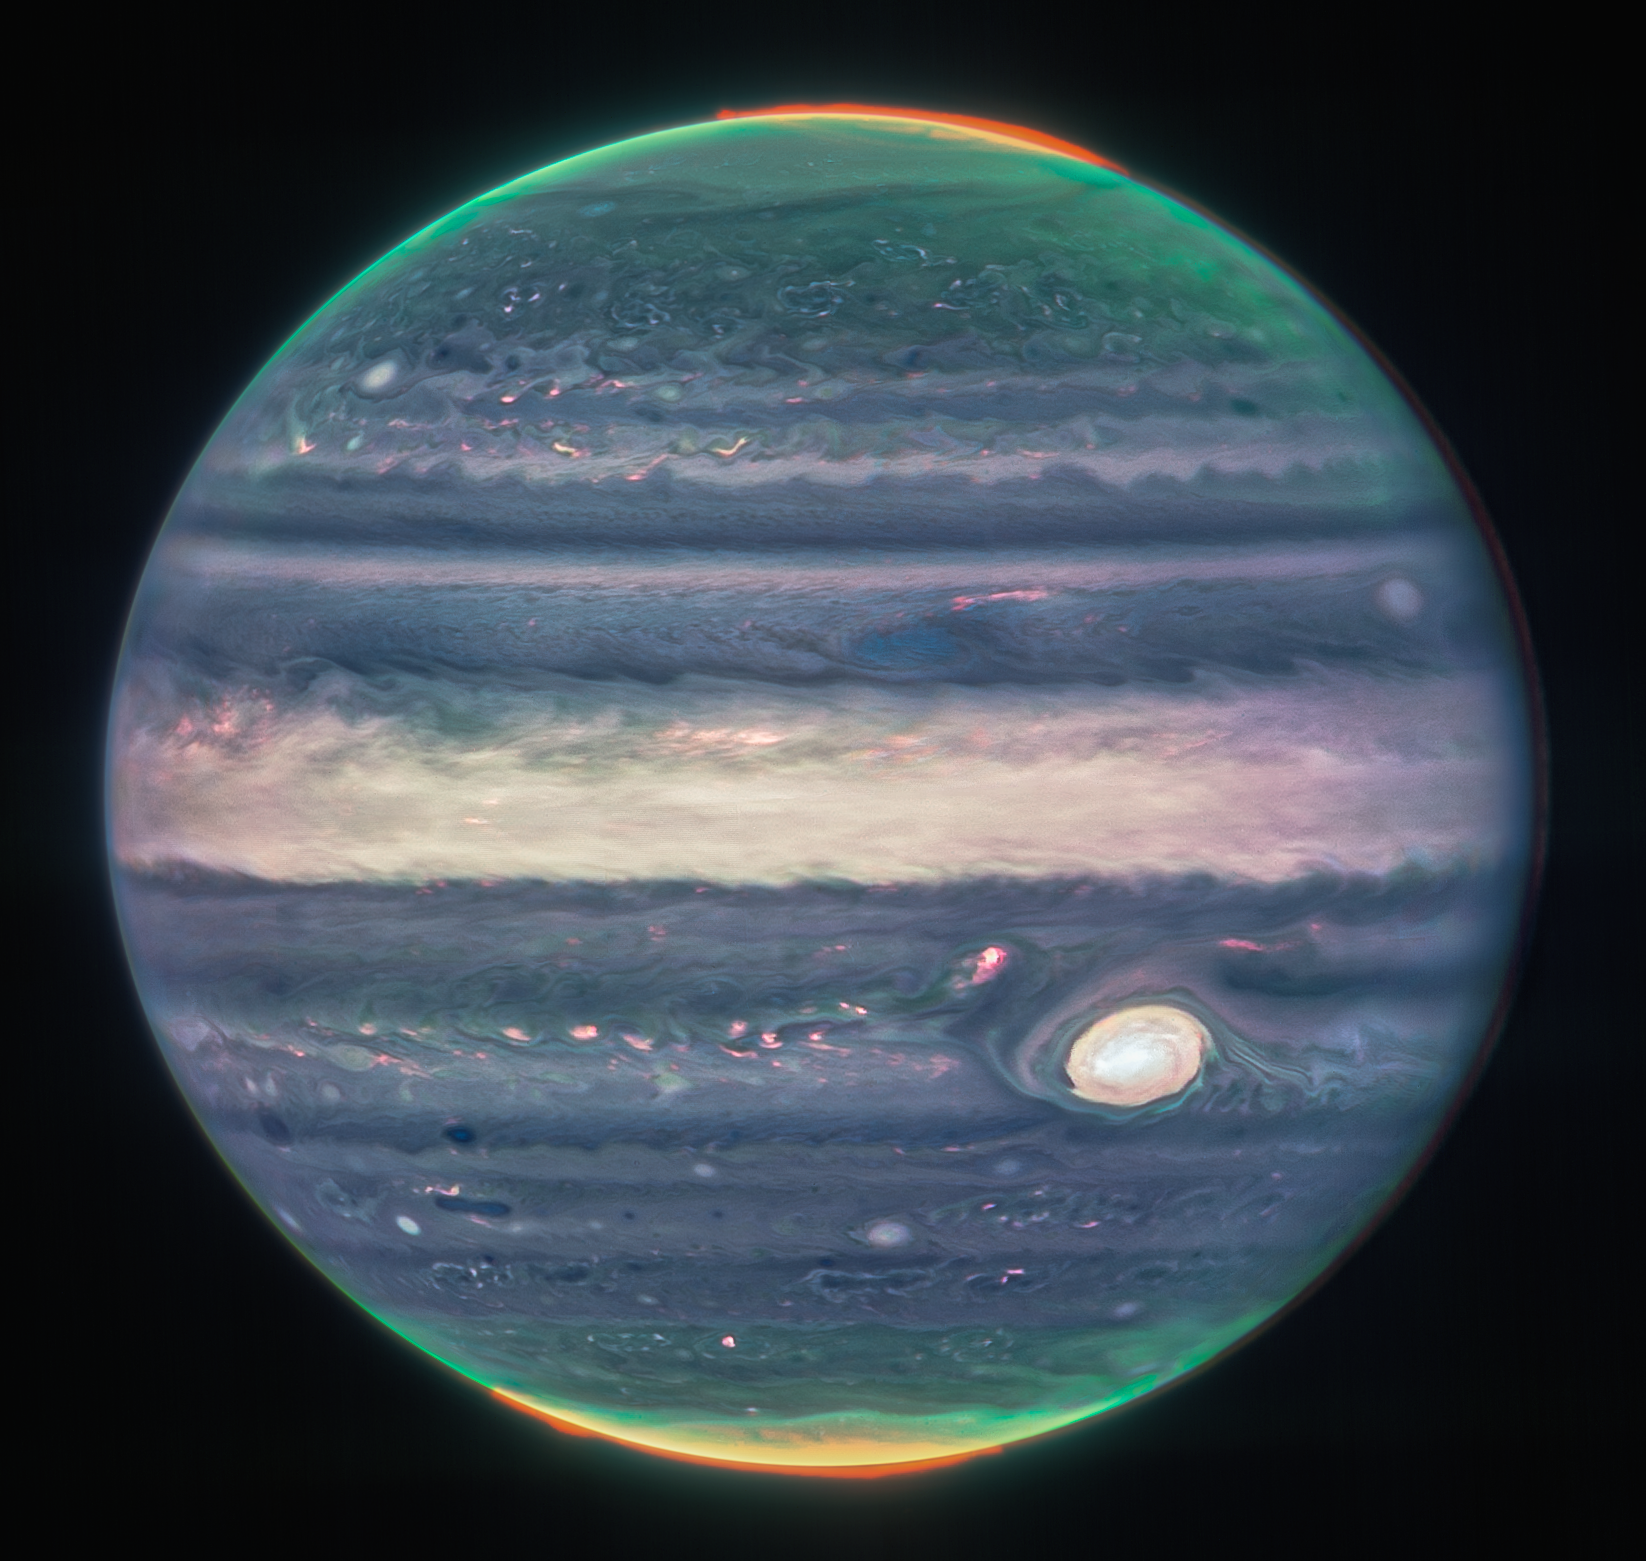 jupiter in infrared coloring with the great red spot at bottom right